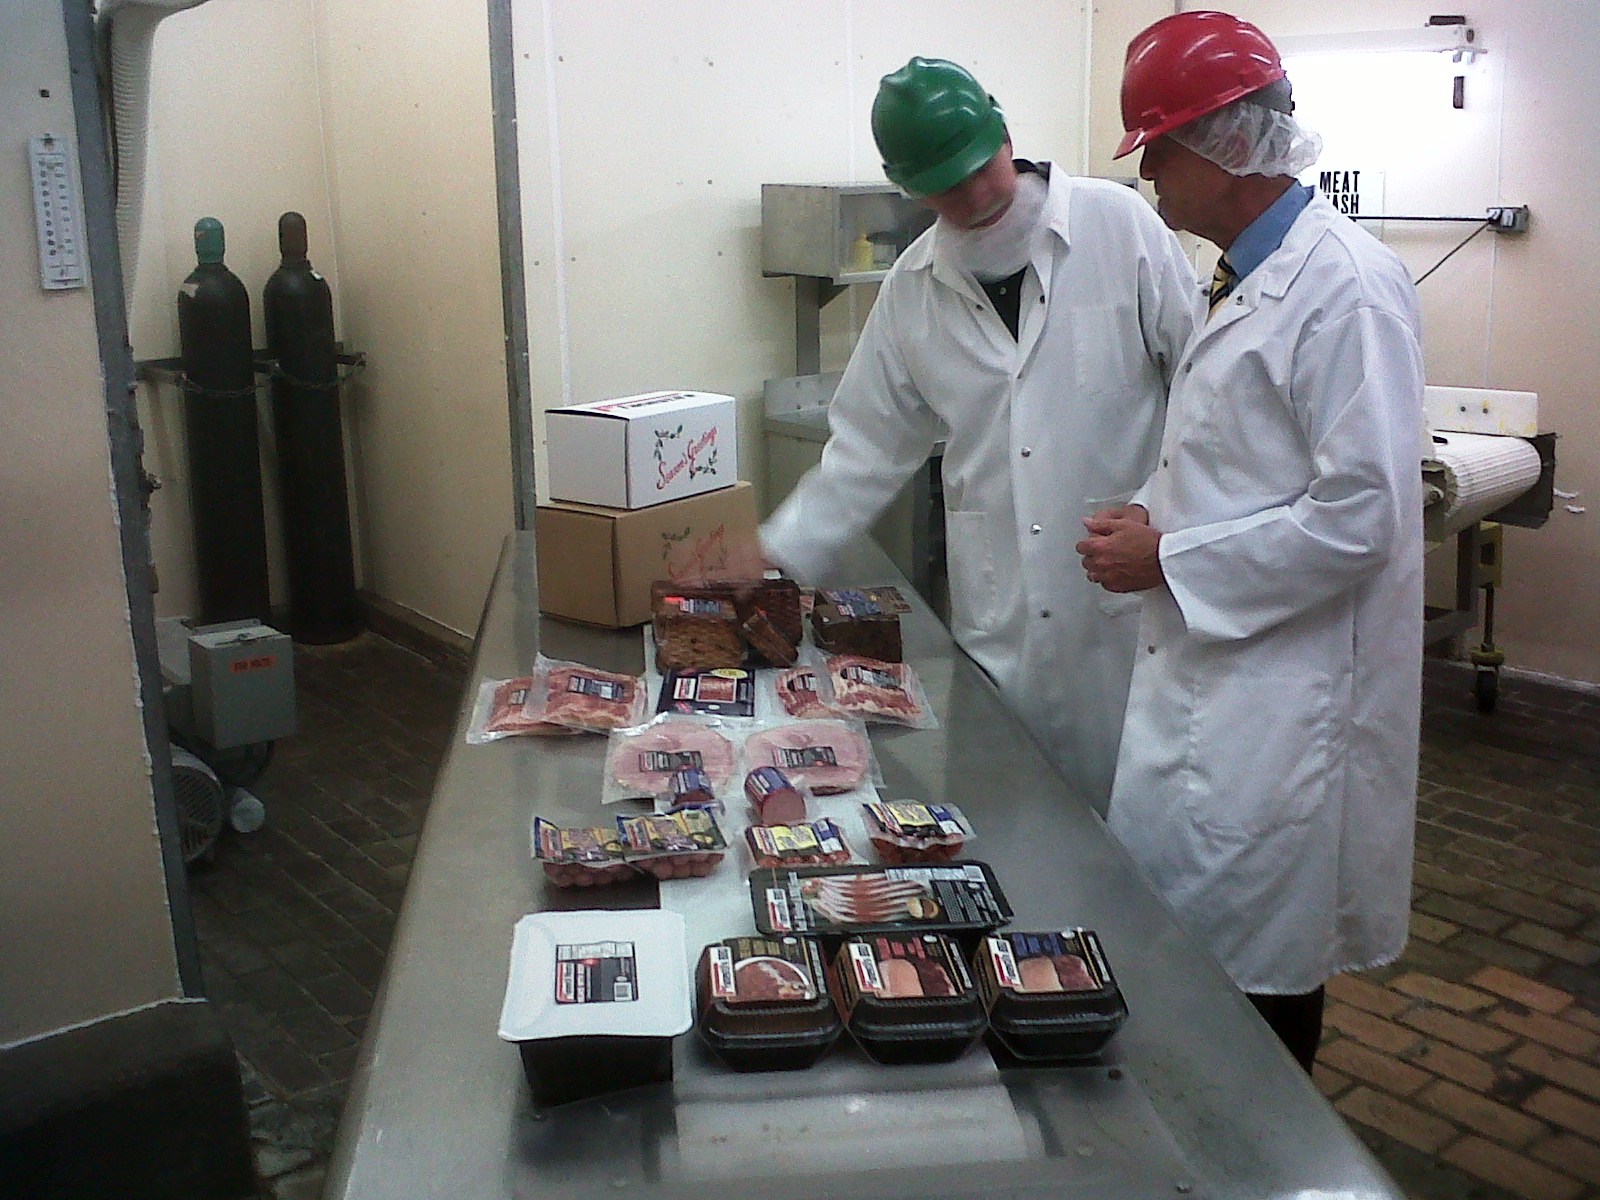 Touring Fanestil’s Meat in Emporia